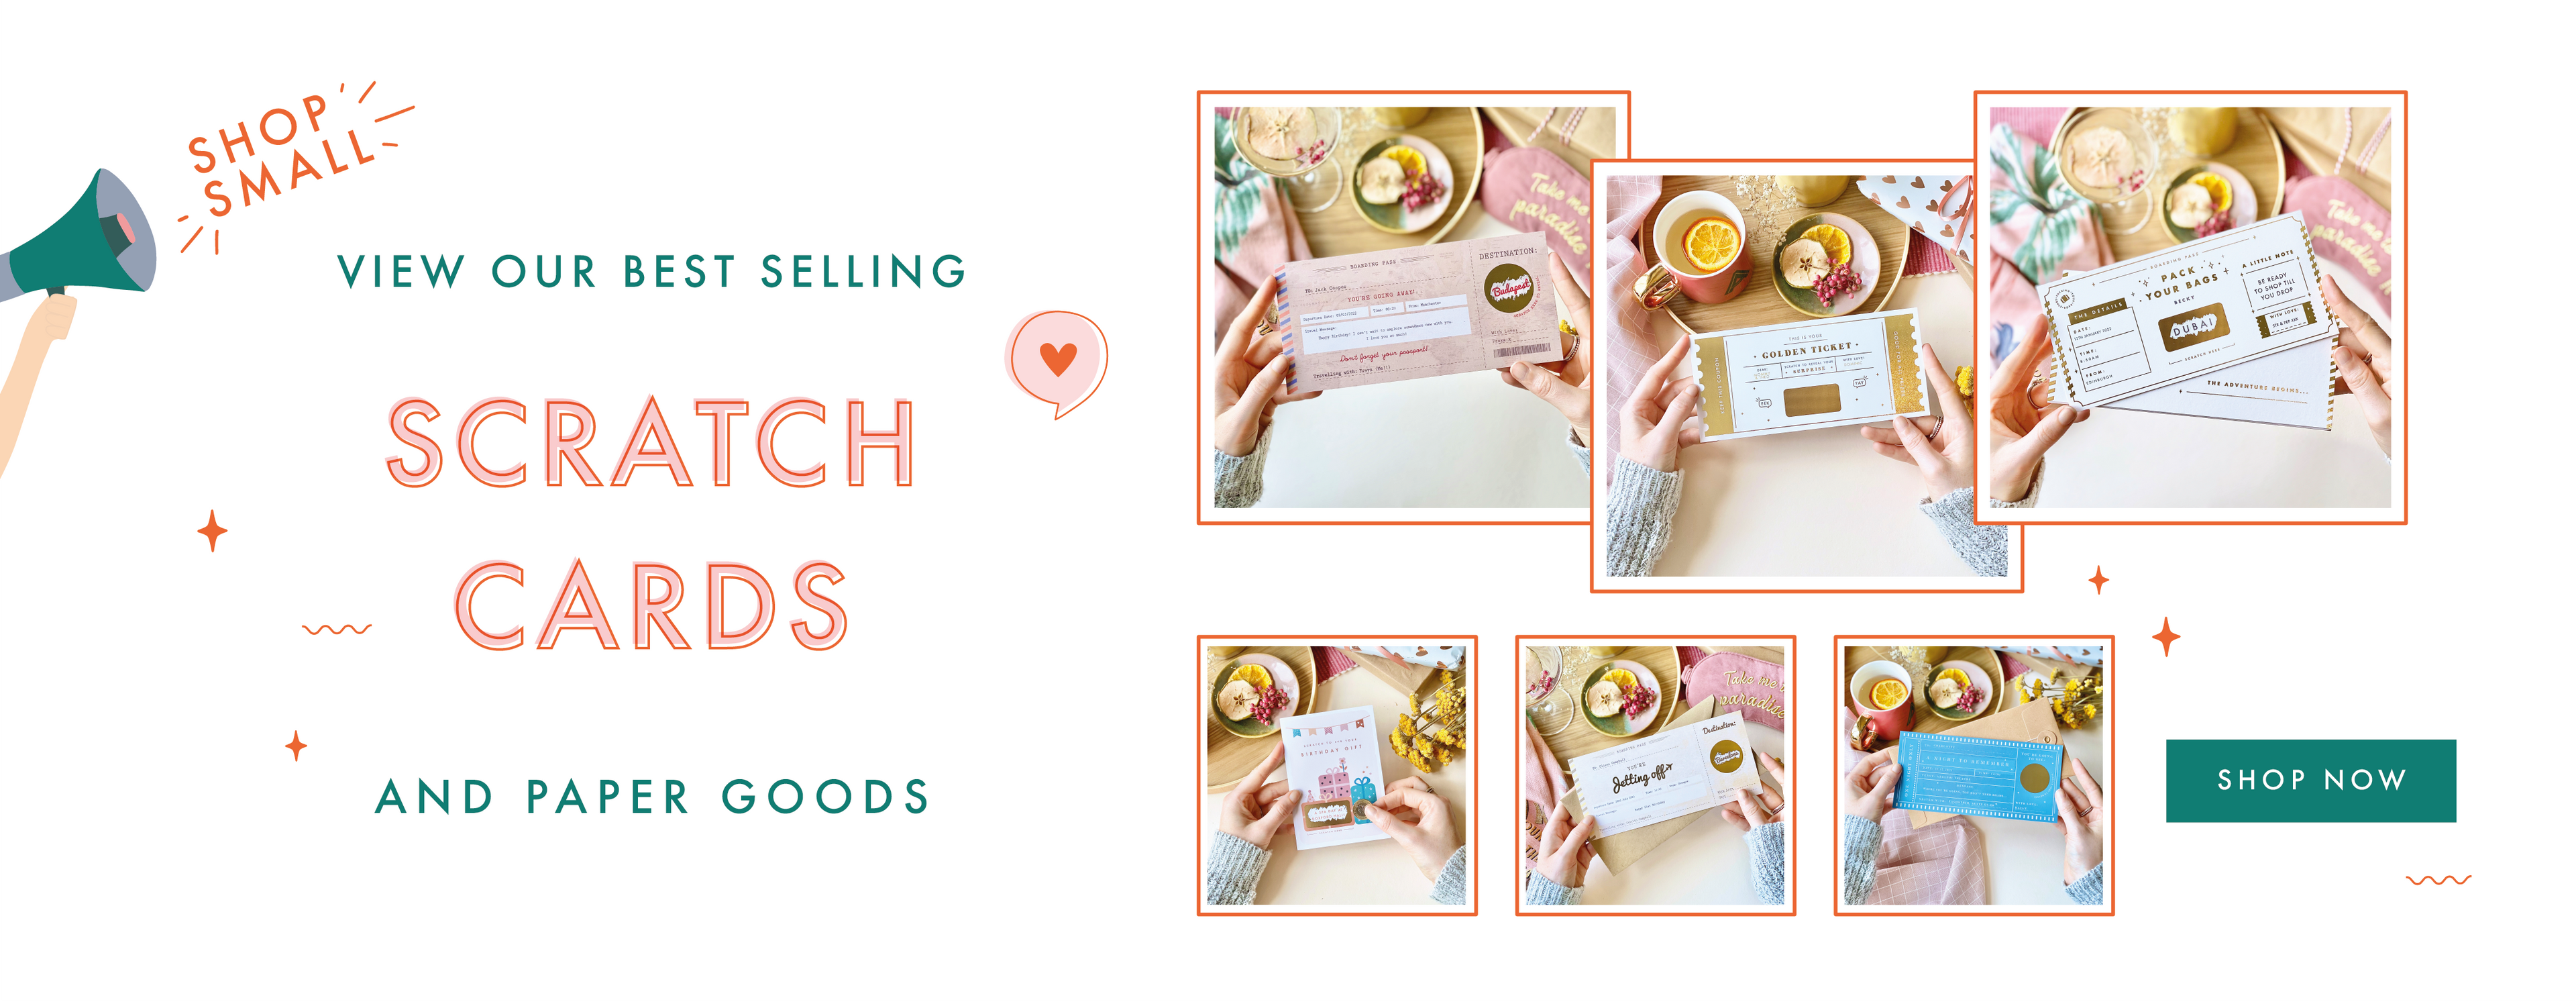 Scratch card greeting card banner